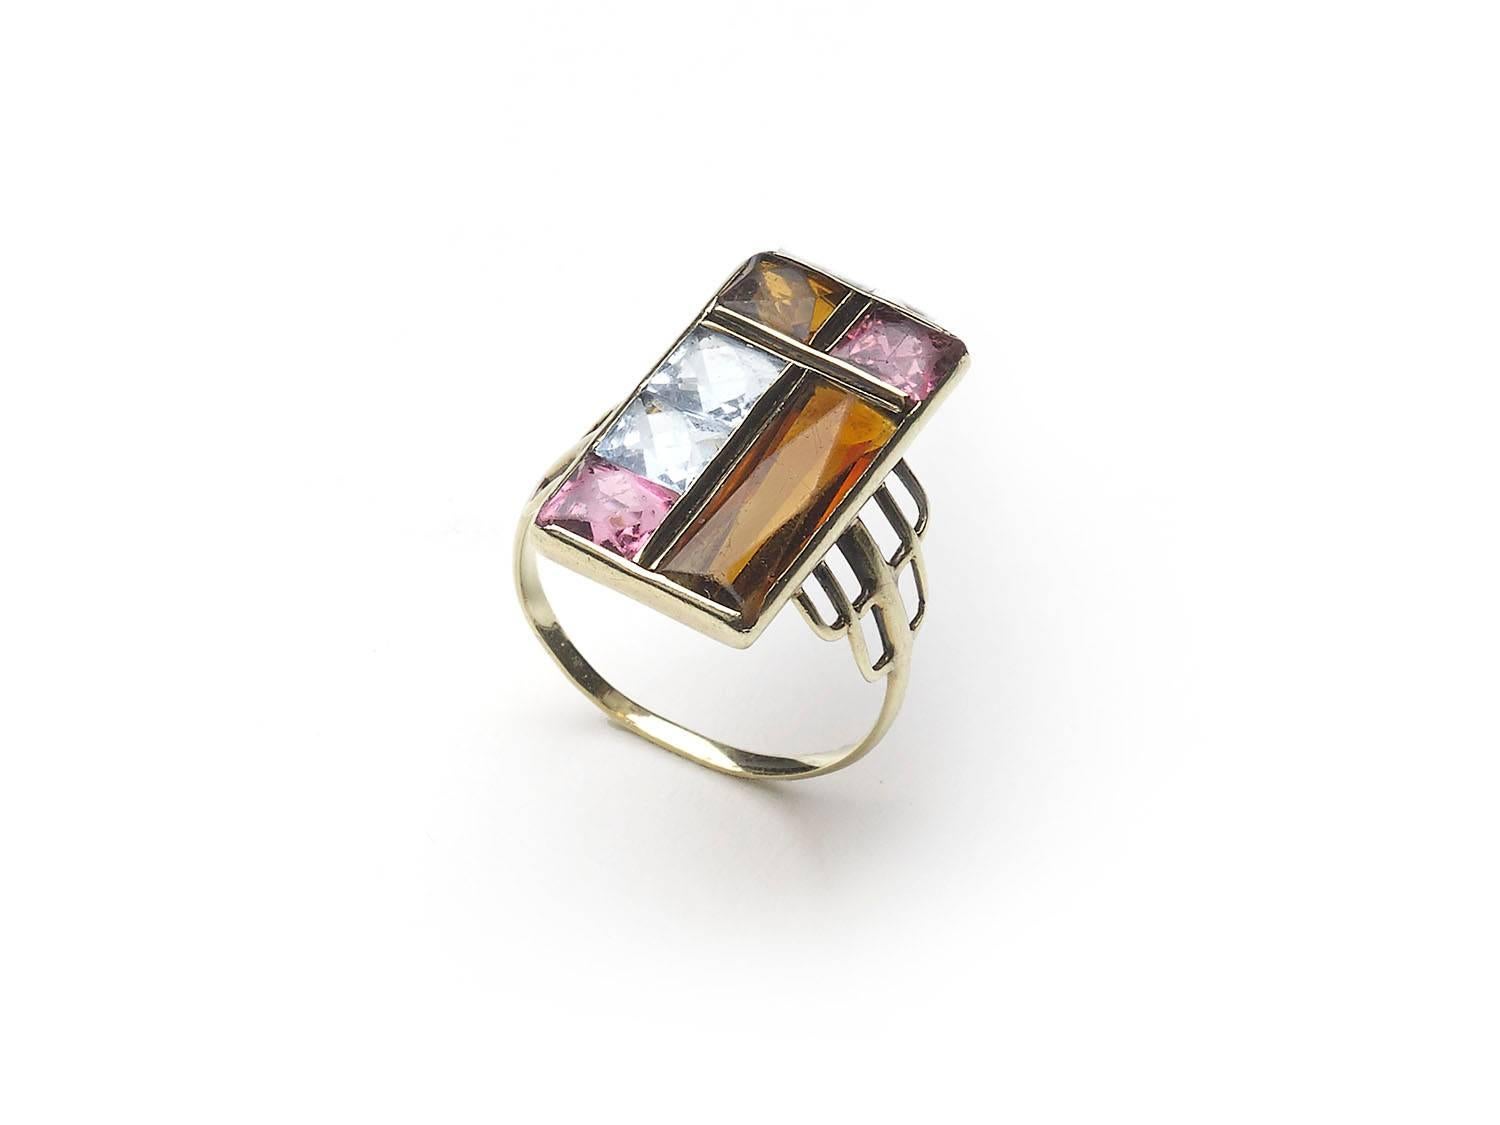 A vintage multi gem ring, set with two princess-cut aquamarines, two princess-cut pink tourmalines, a princess-cut Madeira citrine, and a rectangular, faceted Madeira citrine, set in channel and rub over settings, in an abstract, modernist design,